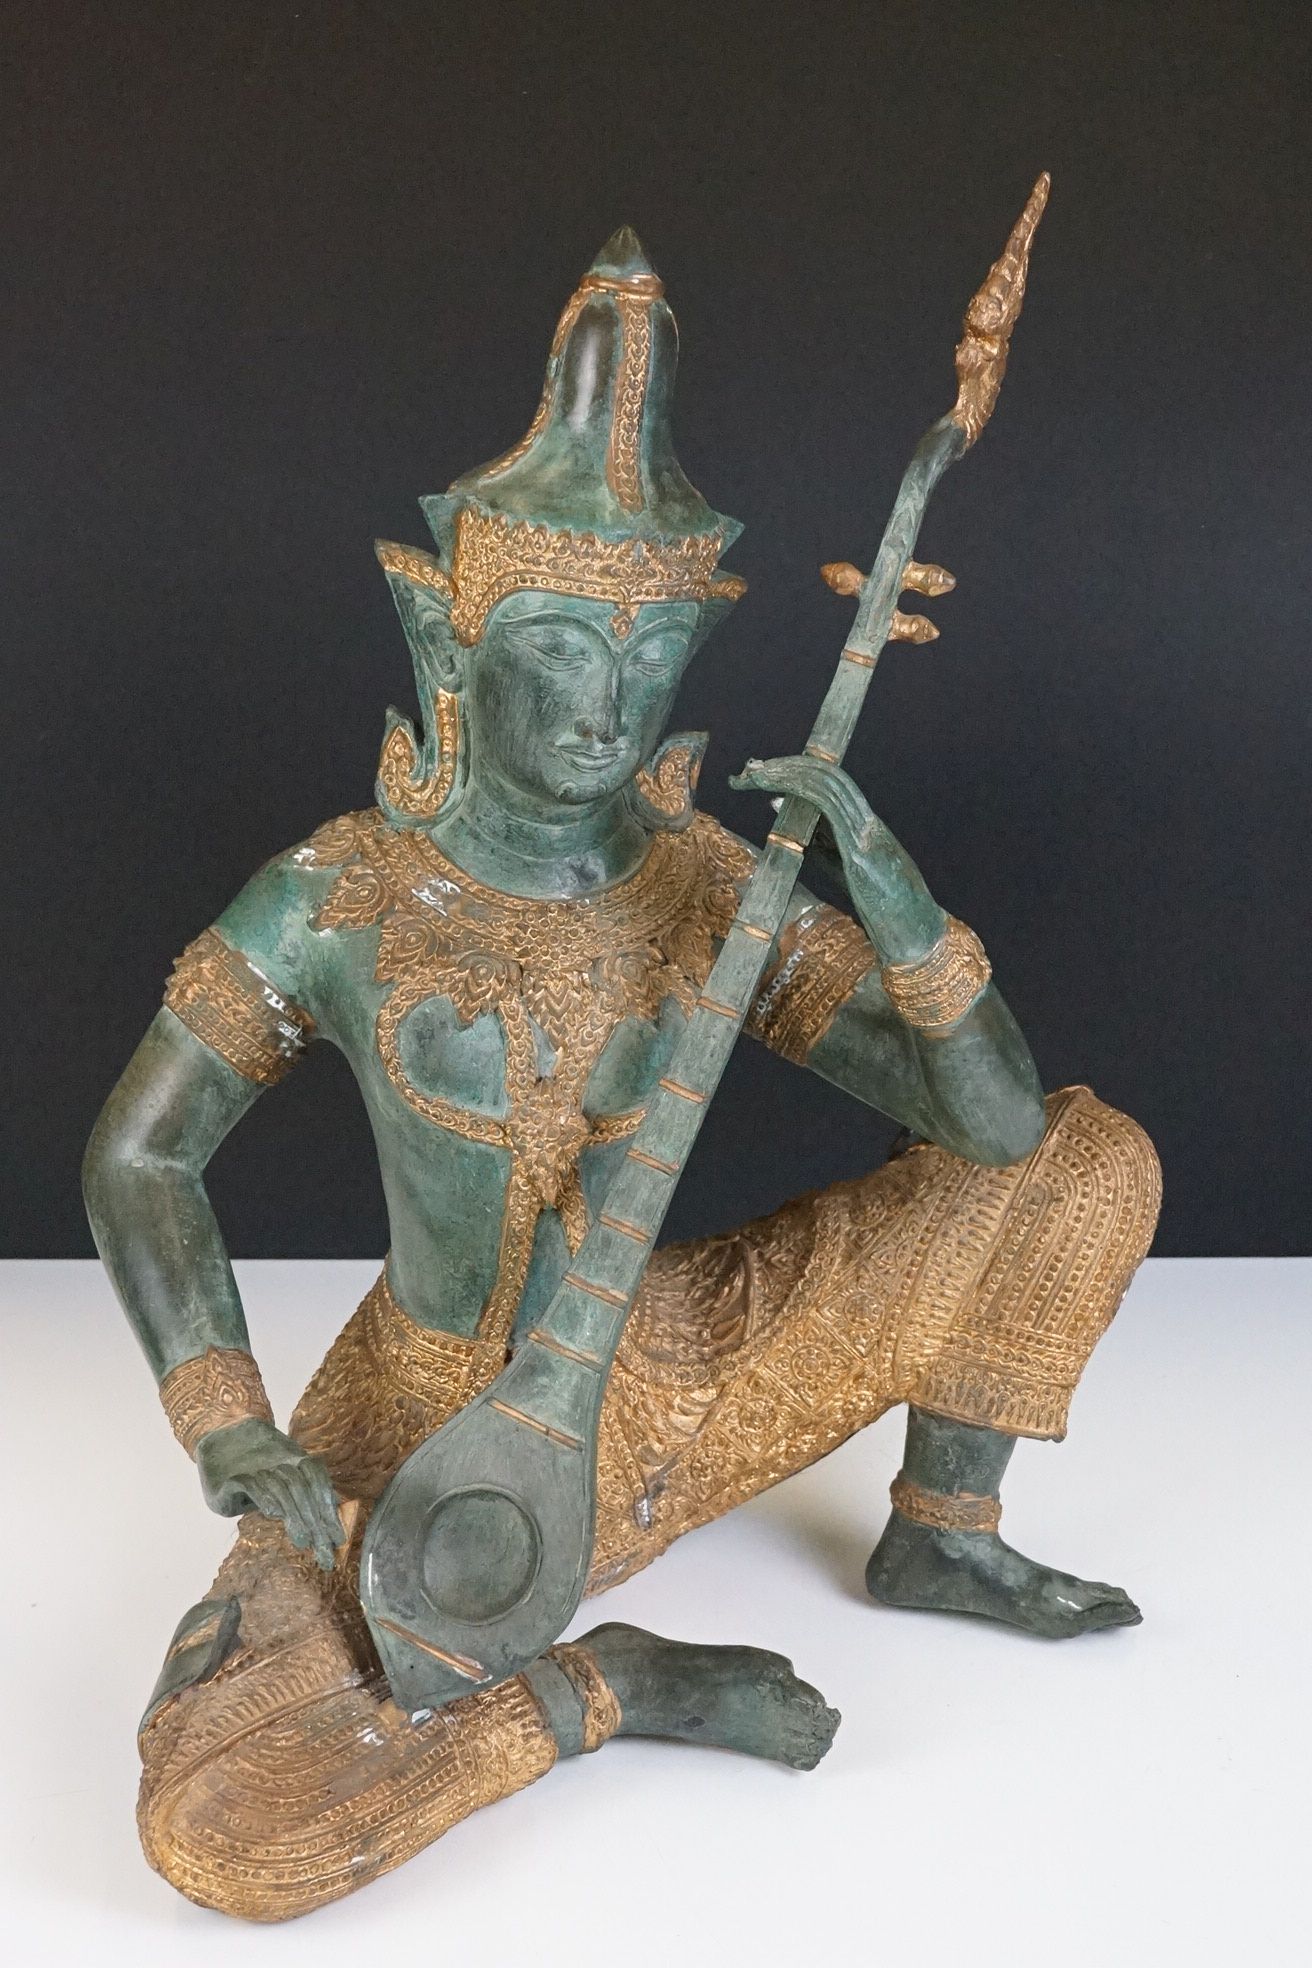 Pair of Thai bronze & gilt sculptures of deities playing musical instruments, one playing a Sueng, - Image 6 of 10